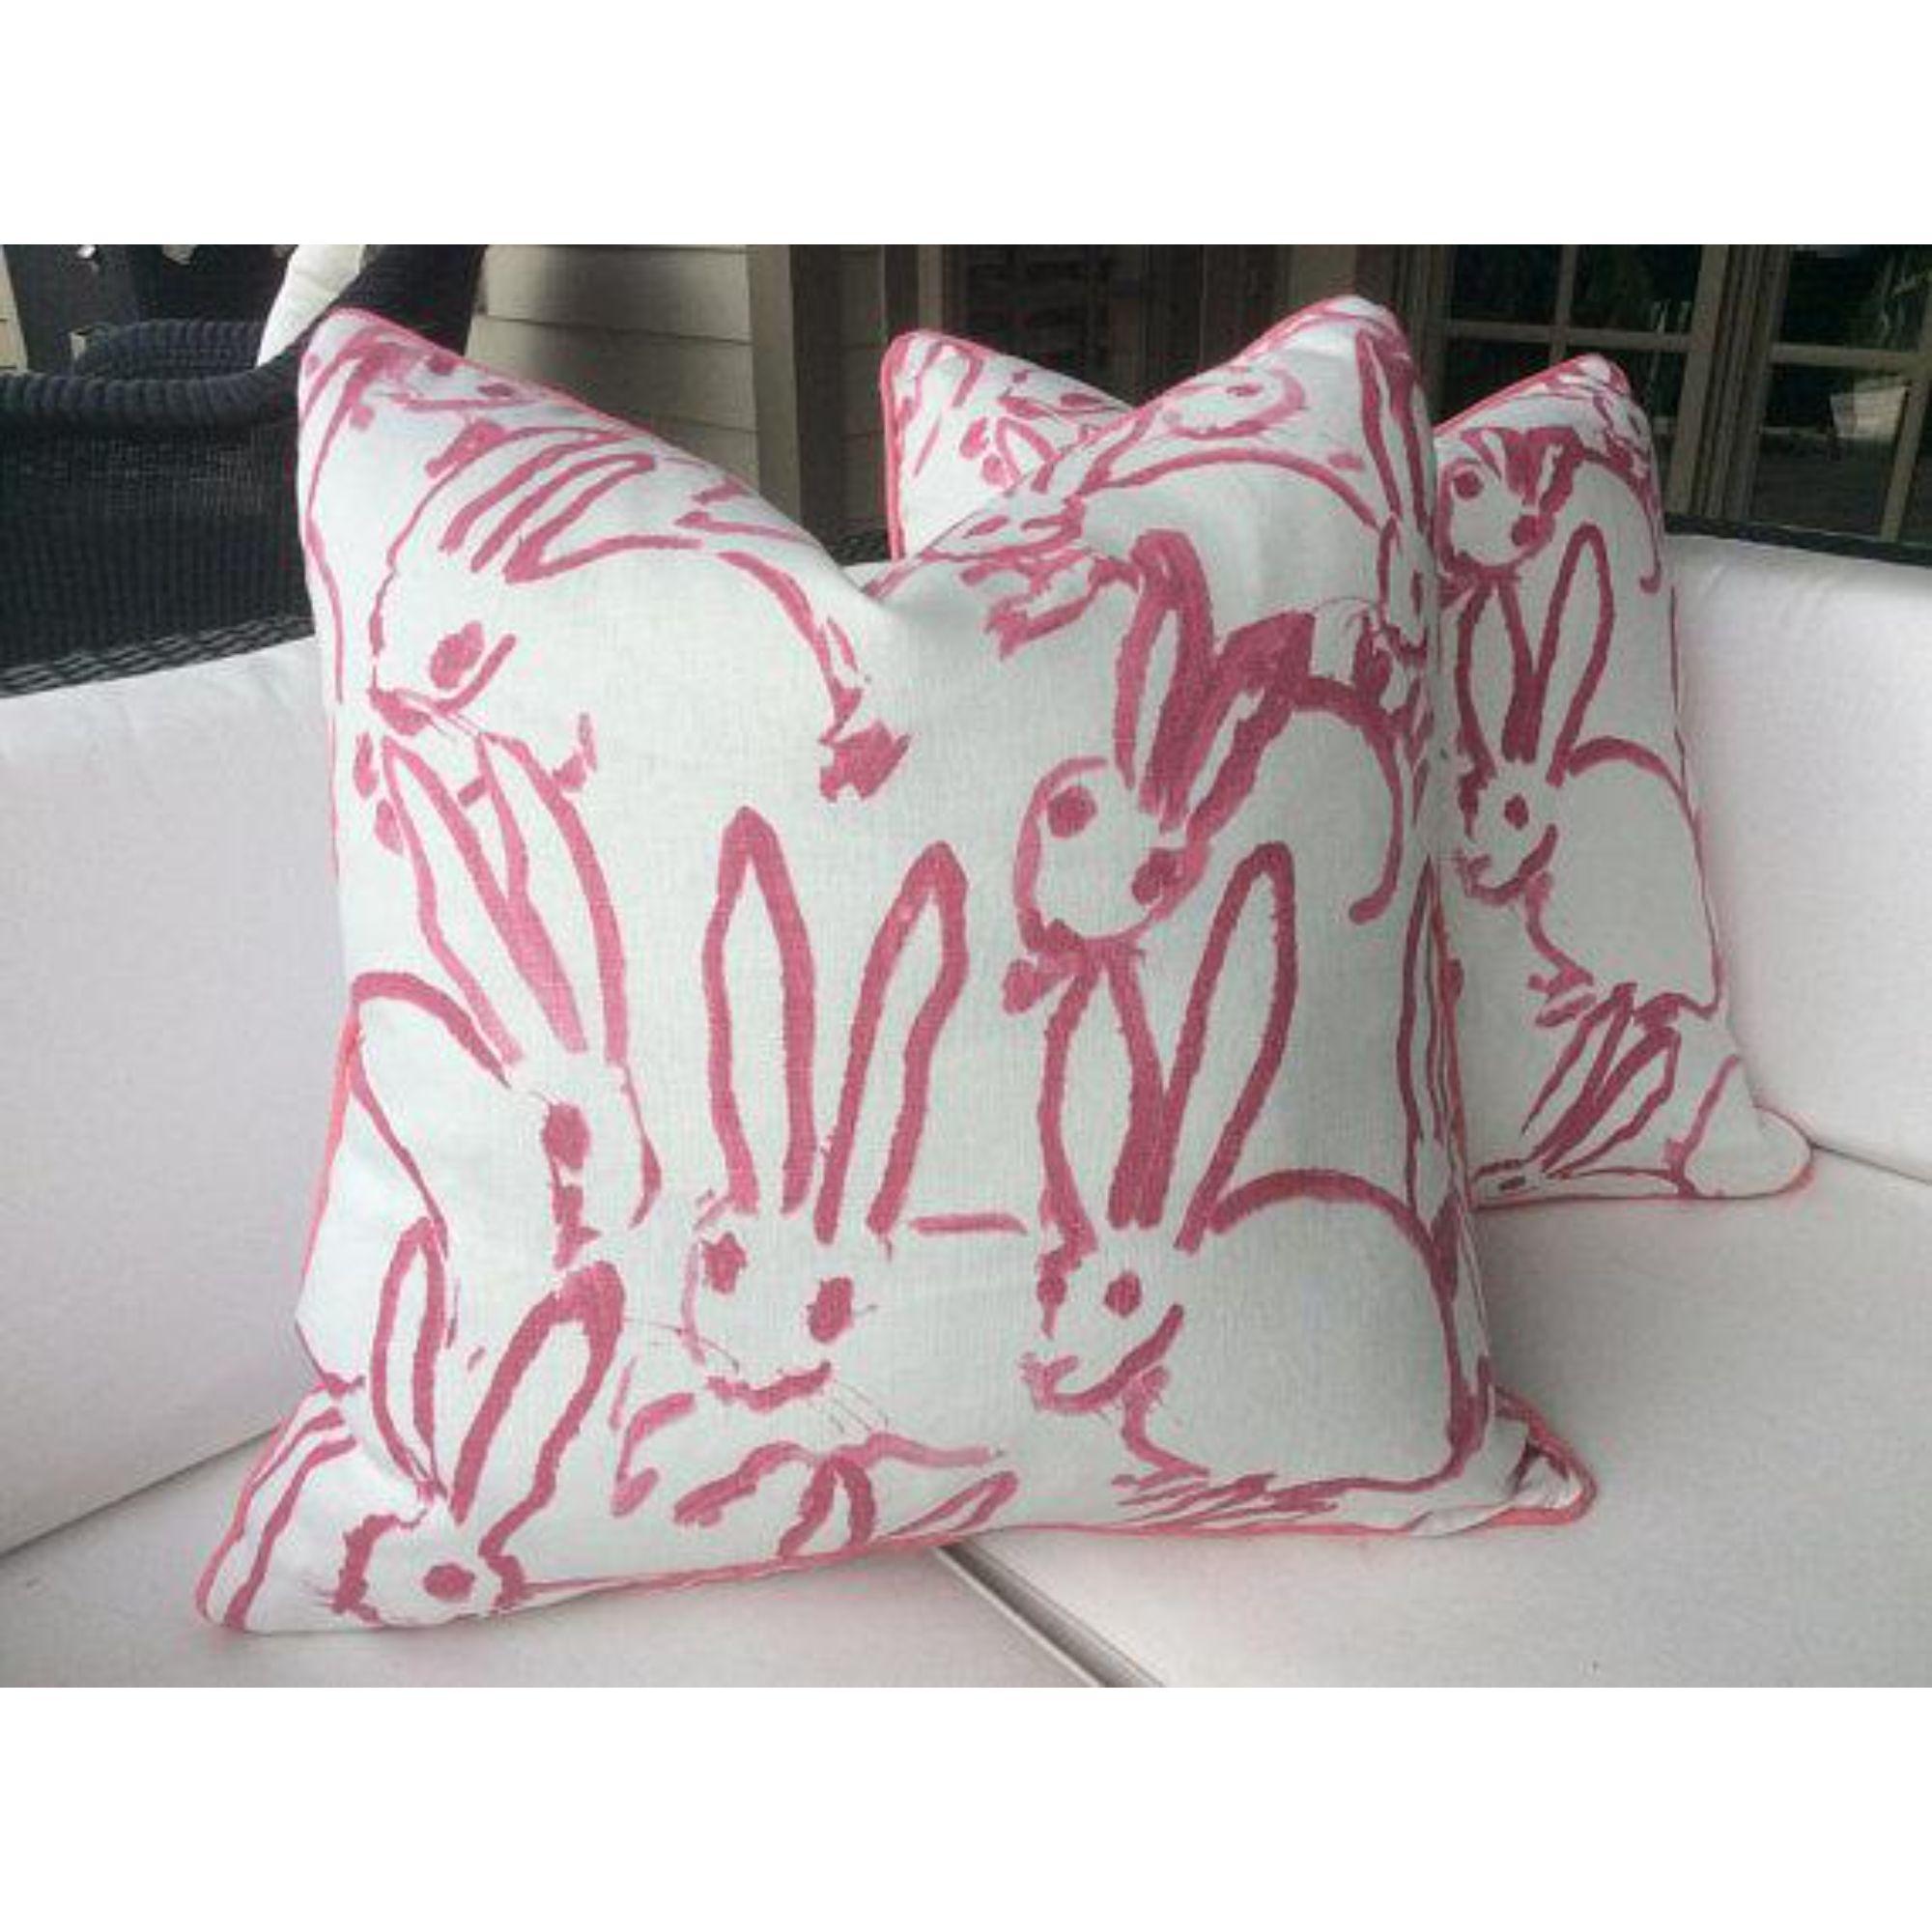 Contemporary Pink Lee Jofa Hunt Slonen Bunny Hutch Pillows - A Pair For Sale